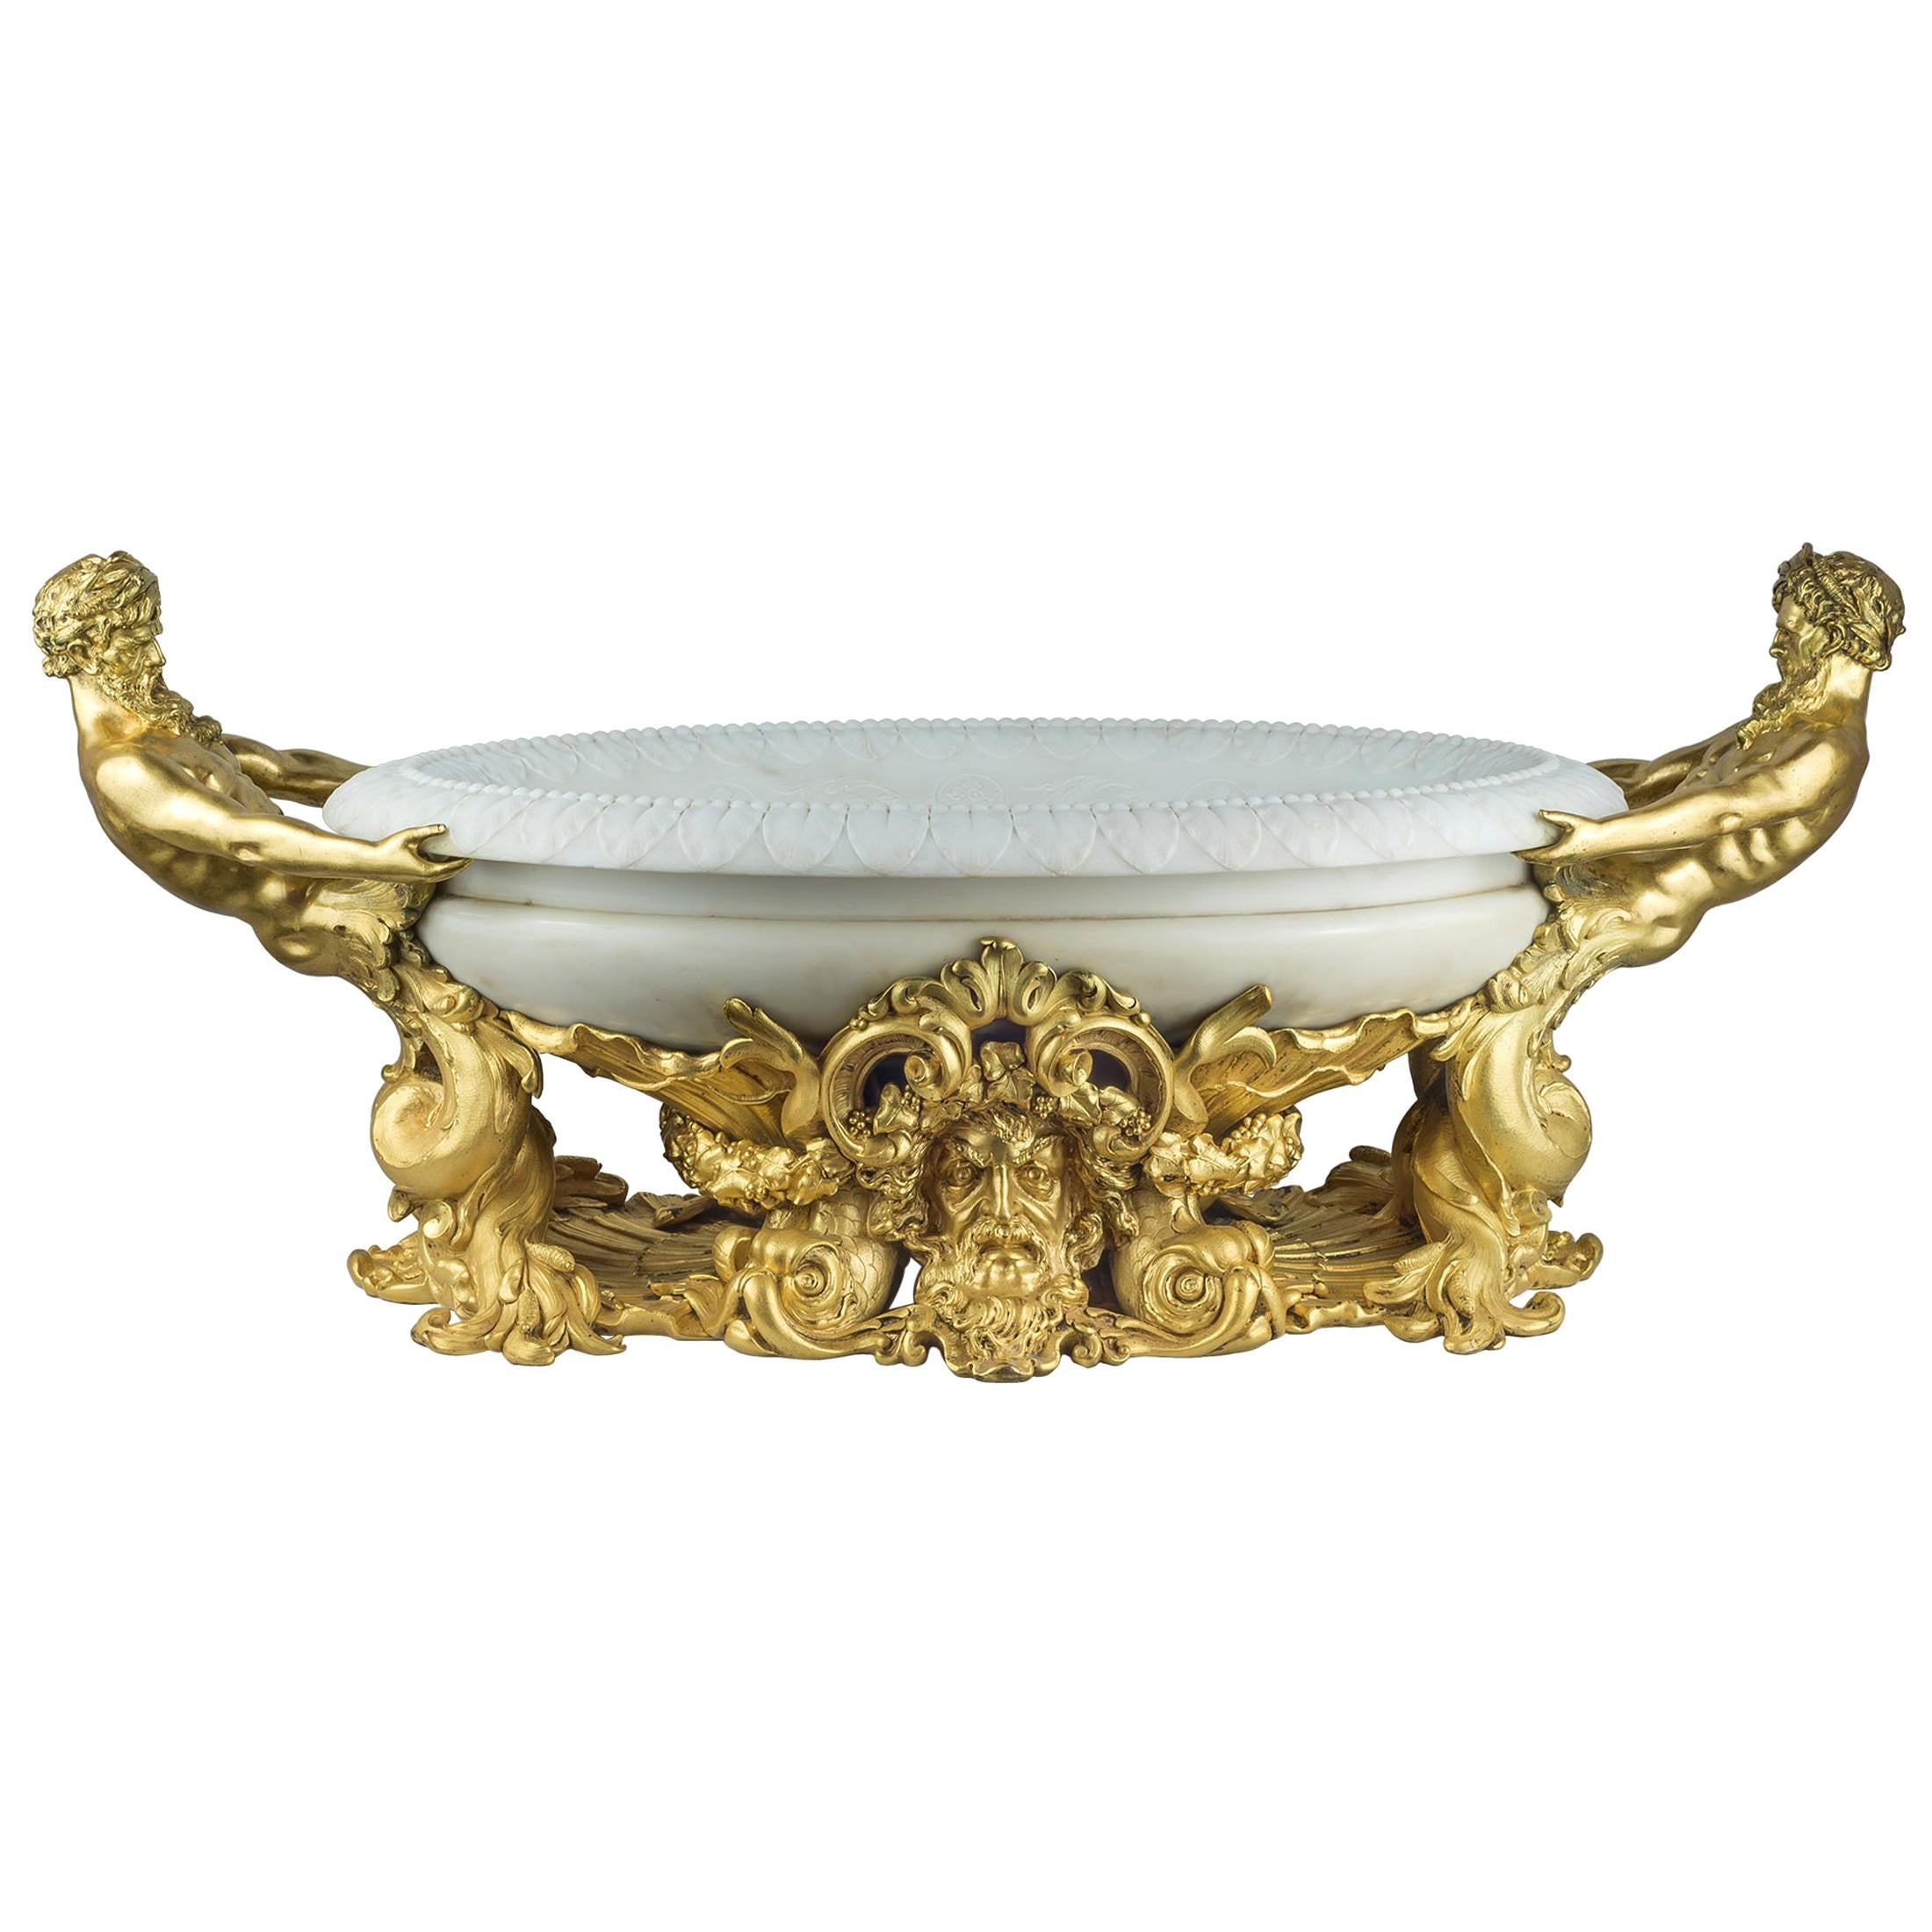 Magnificent Large Caldwell & Co. Ormolu and White Marble Centerpiece